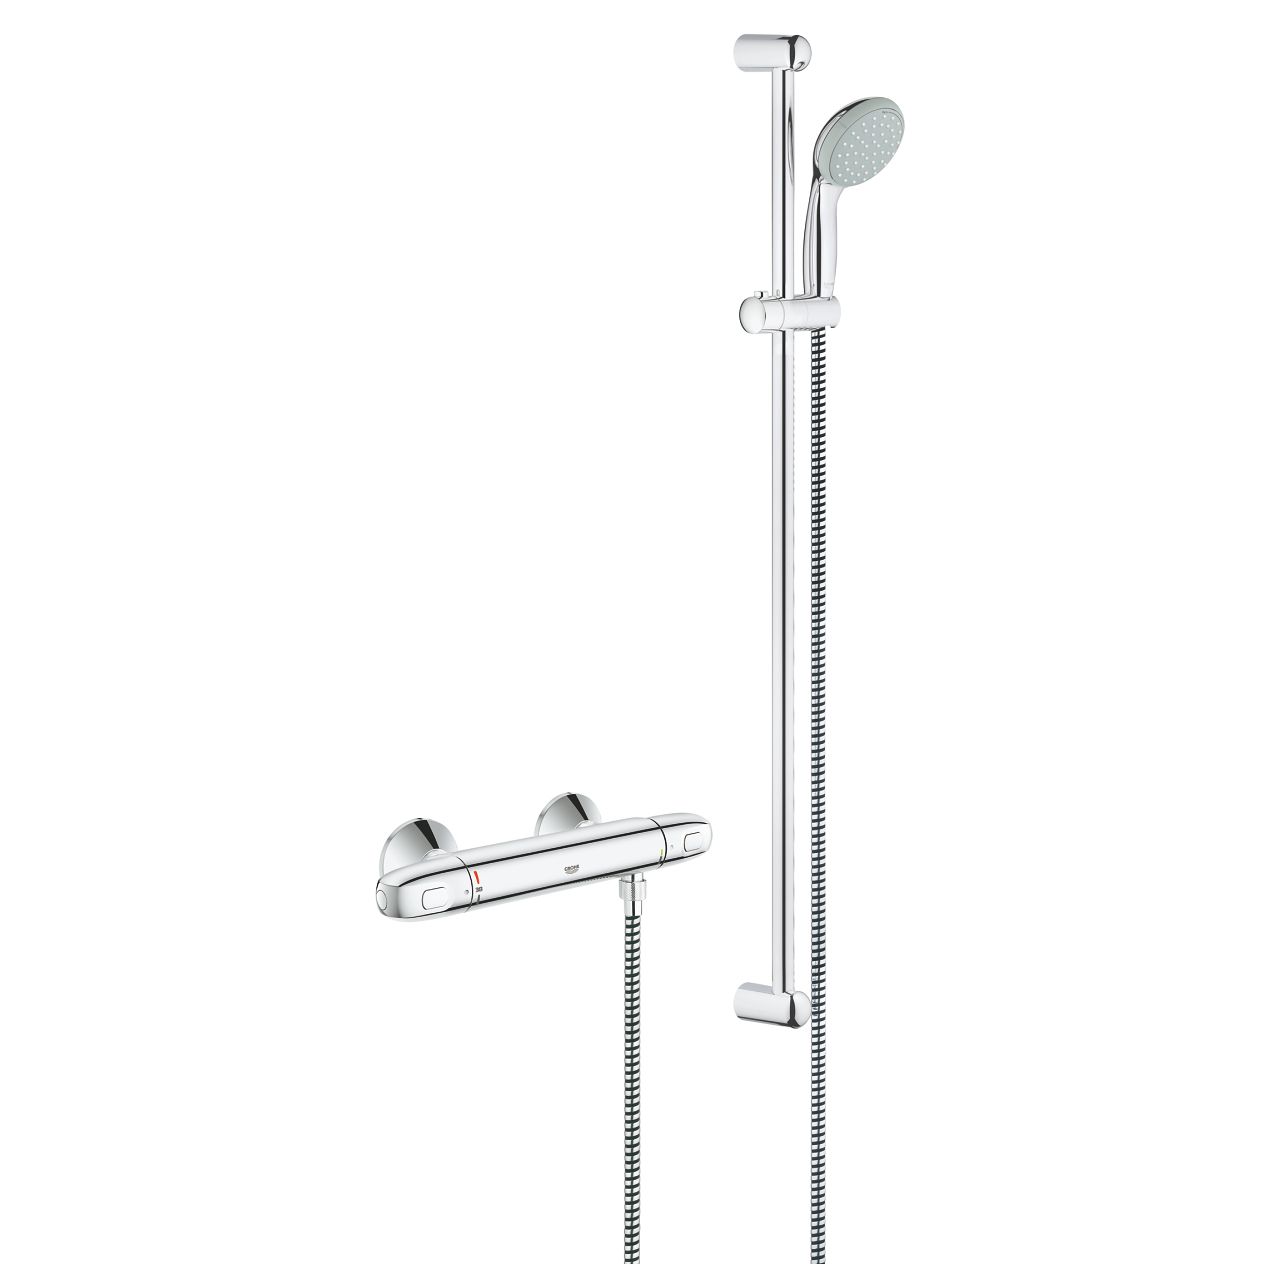  Grohe Grohtherm 1000 - 34256003 